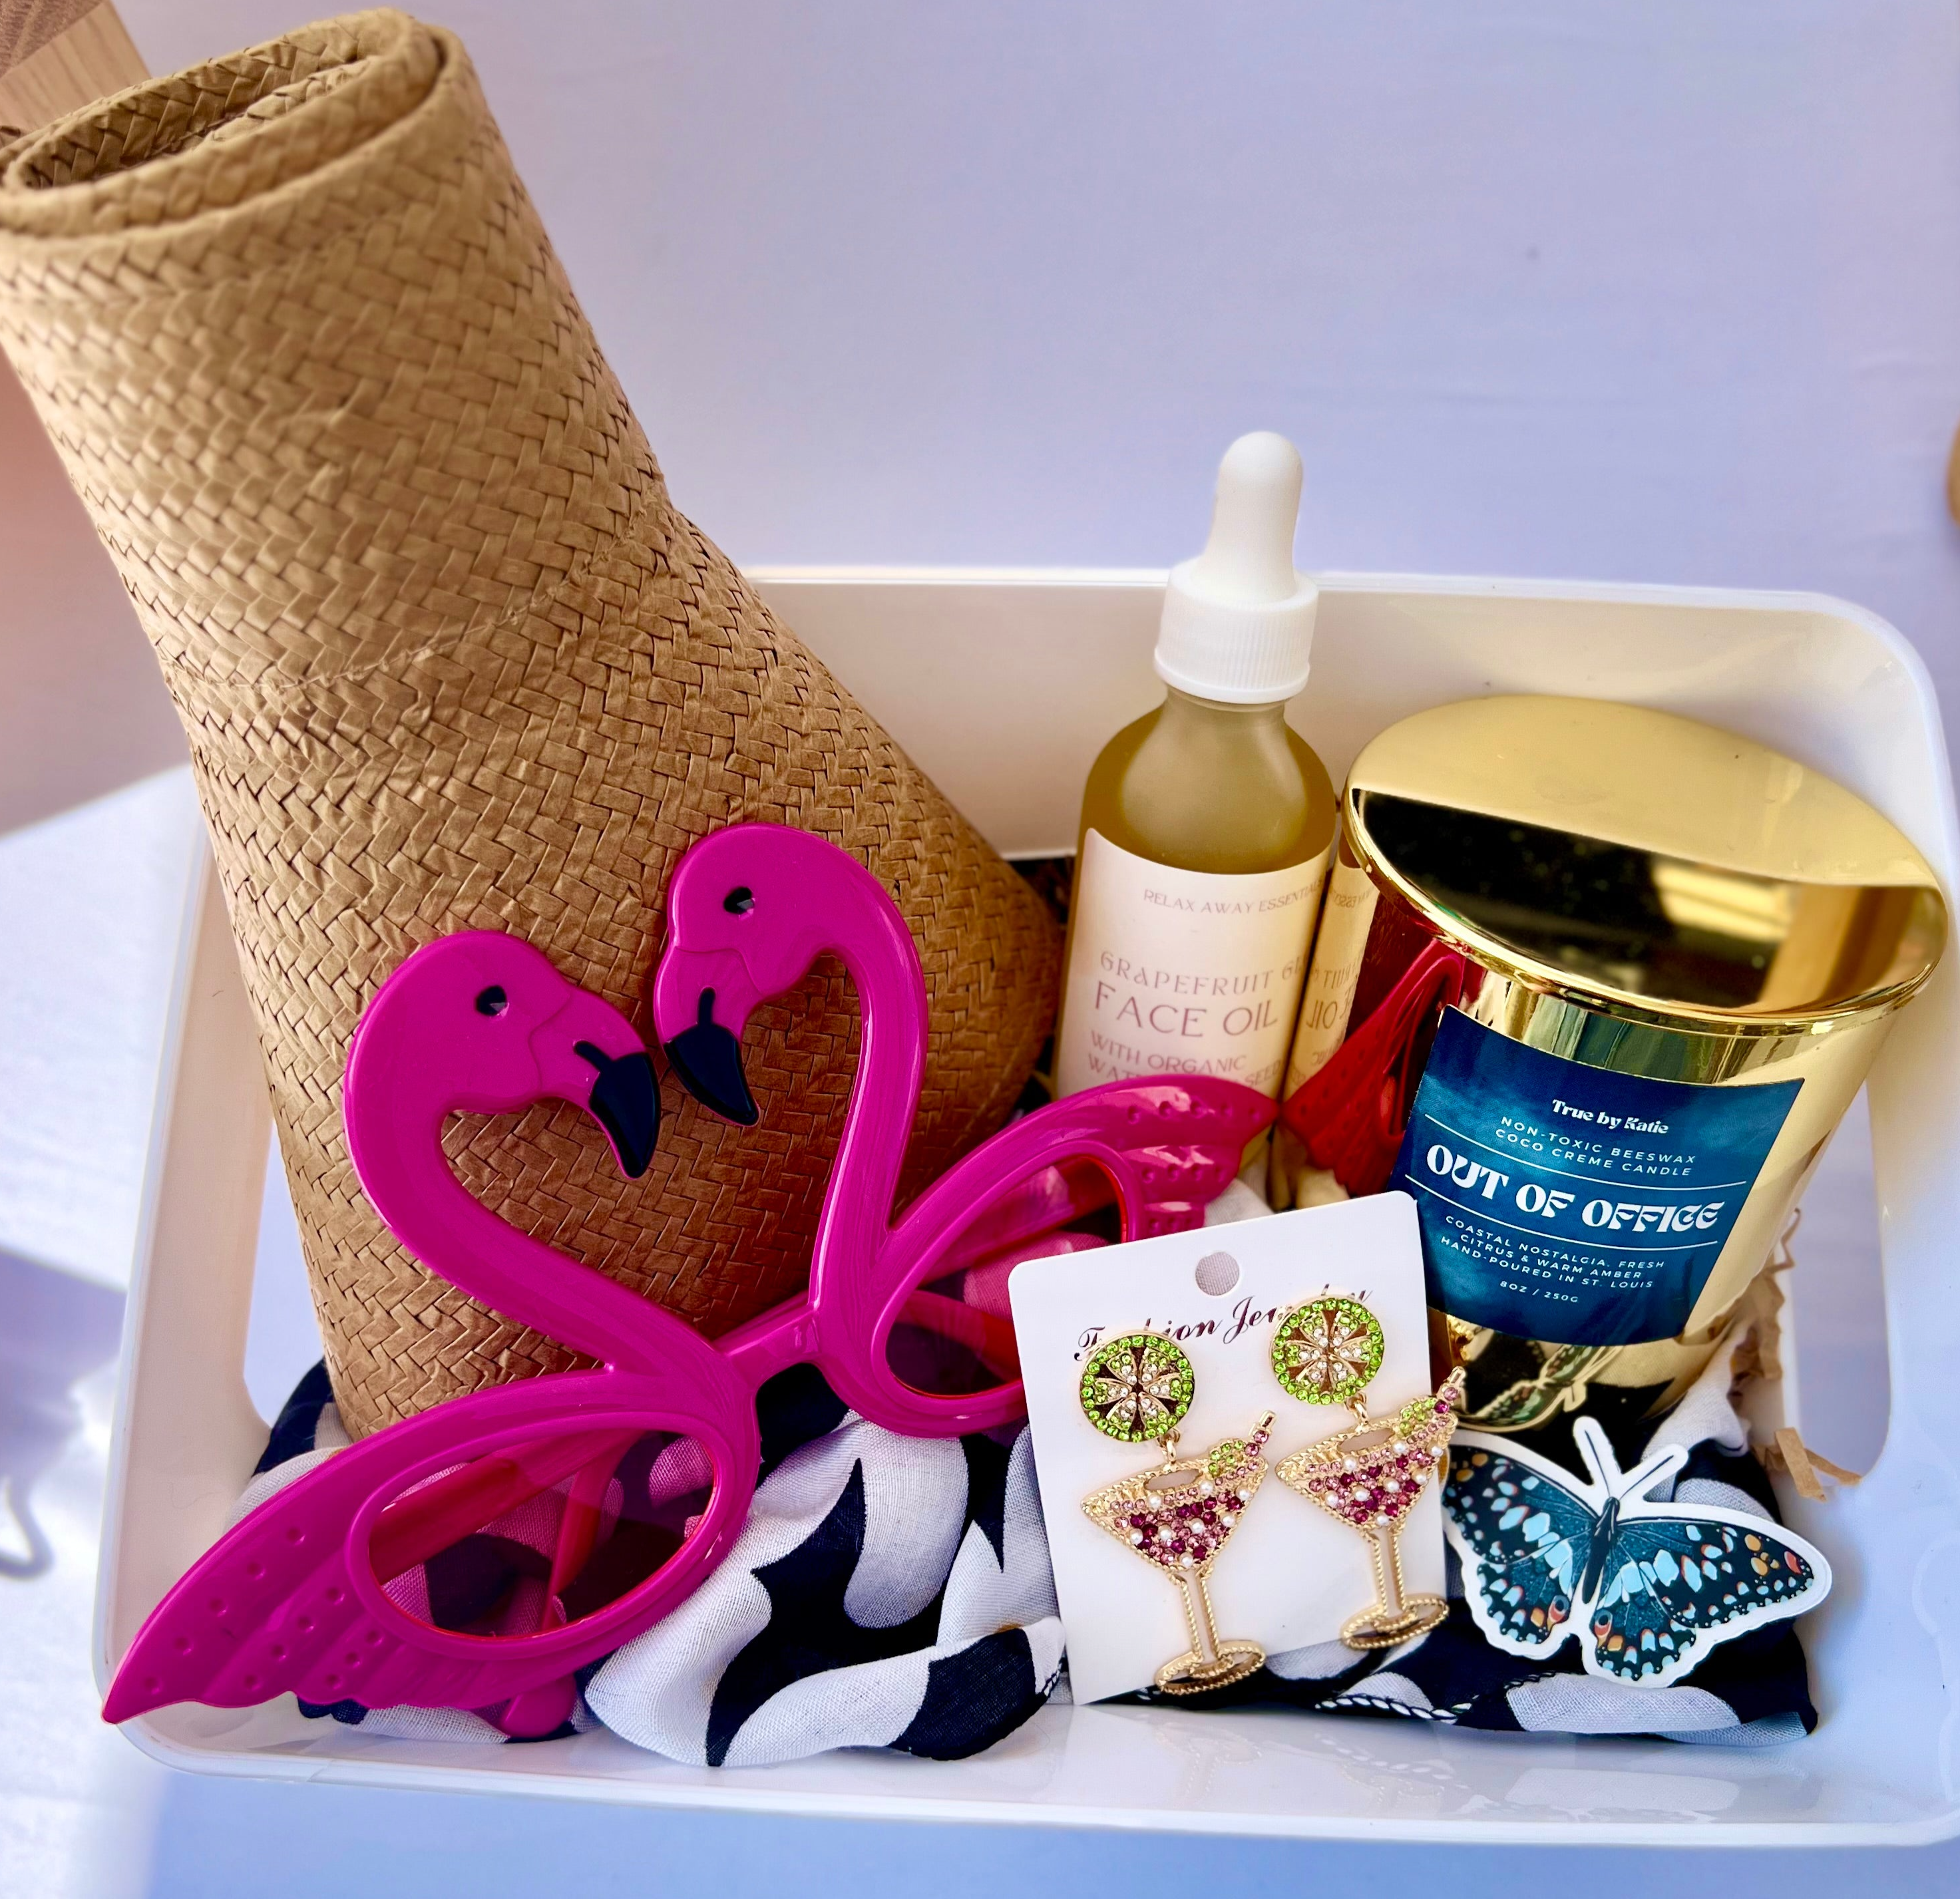 Summer Escape Gift Set – Pre-Vacation Pampering & Fun in the Sun